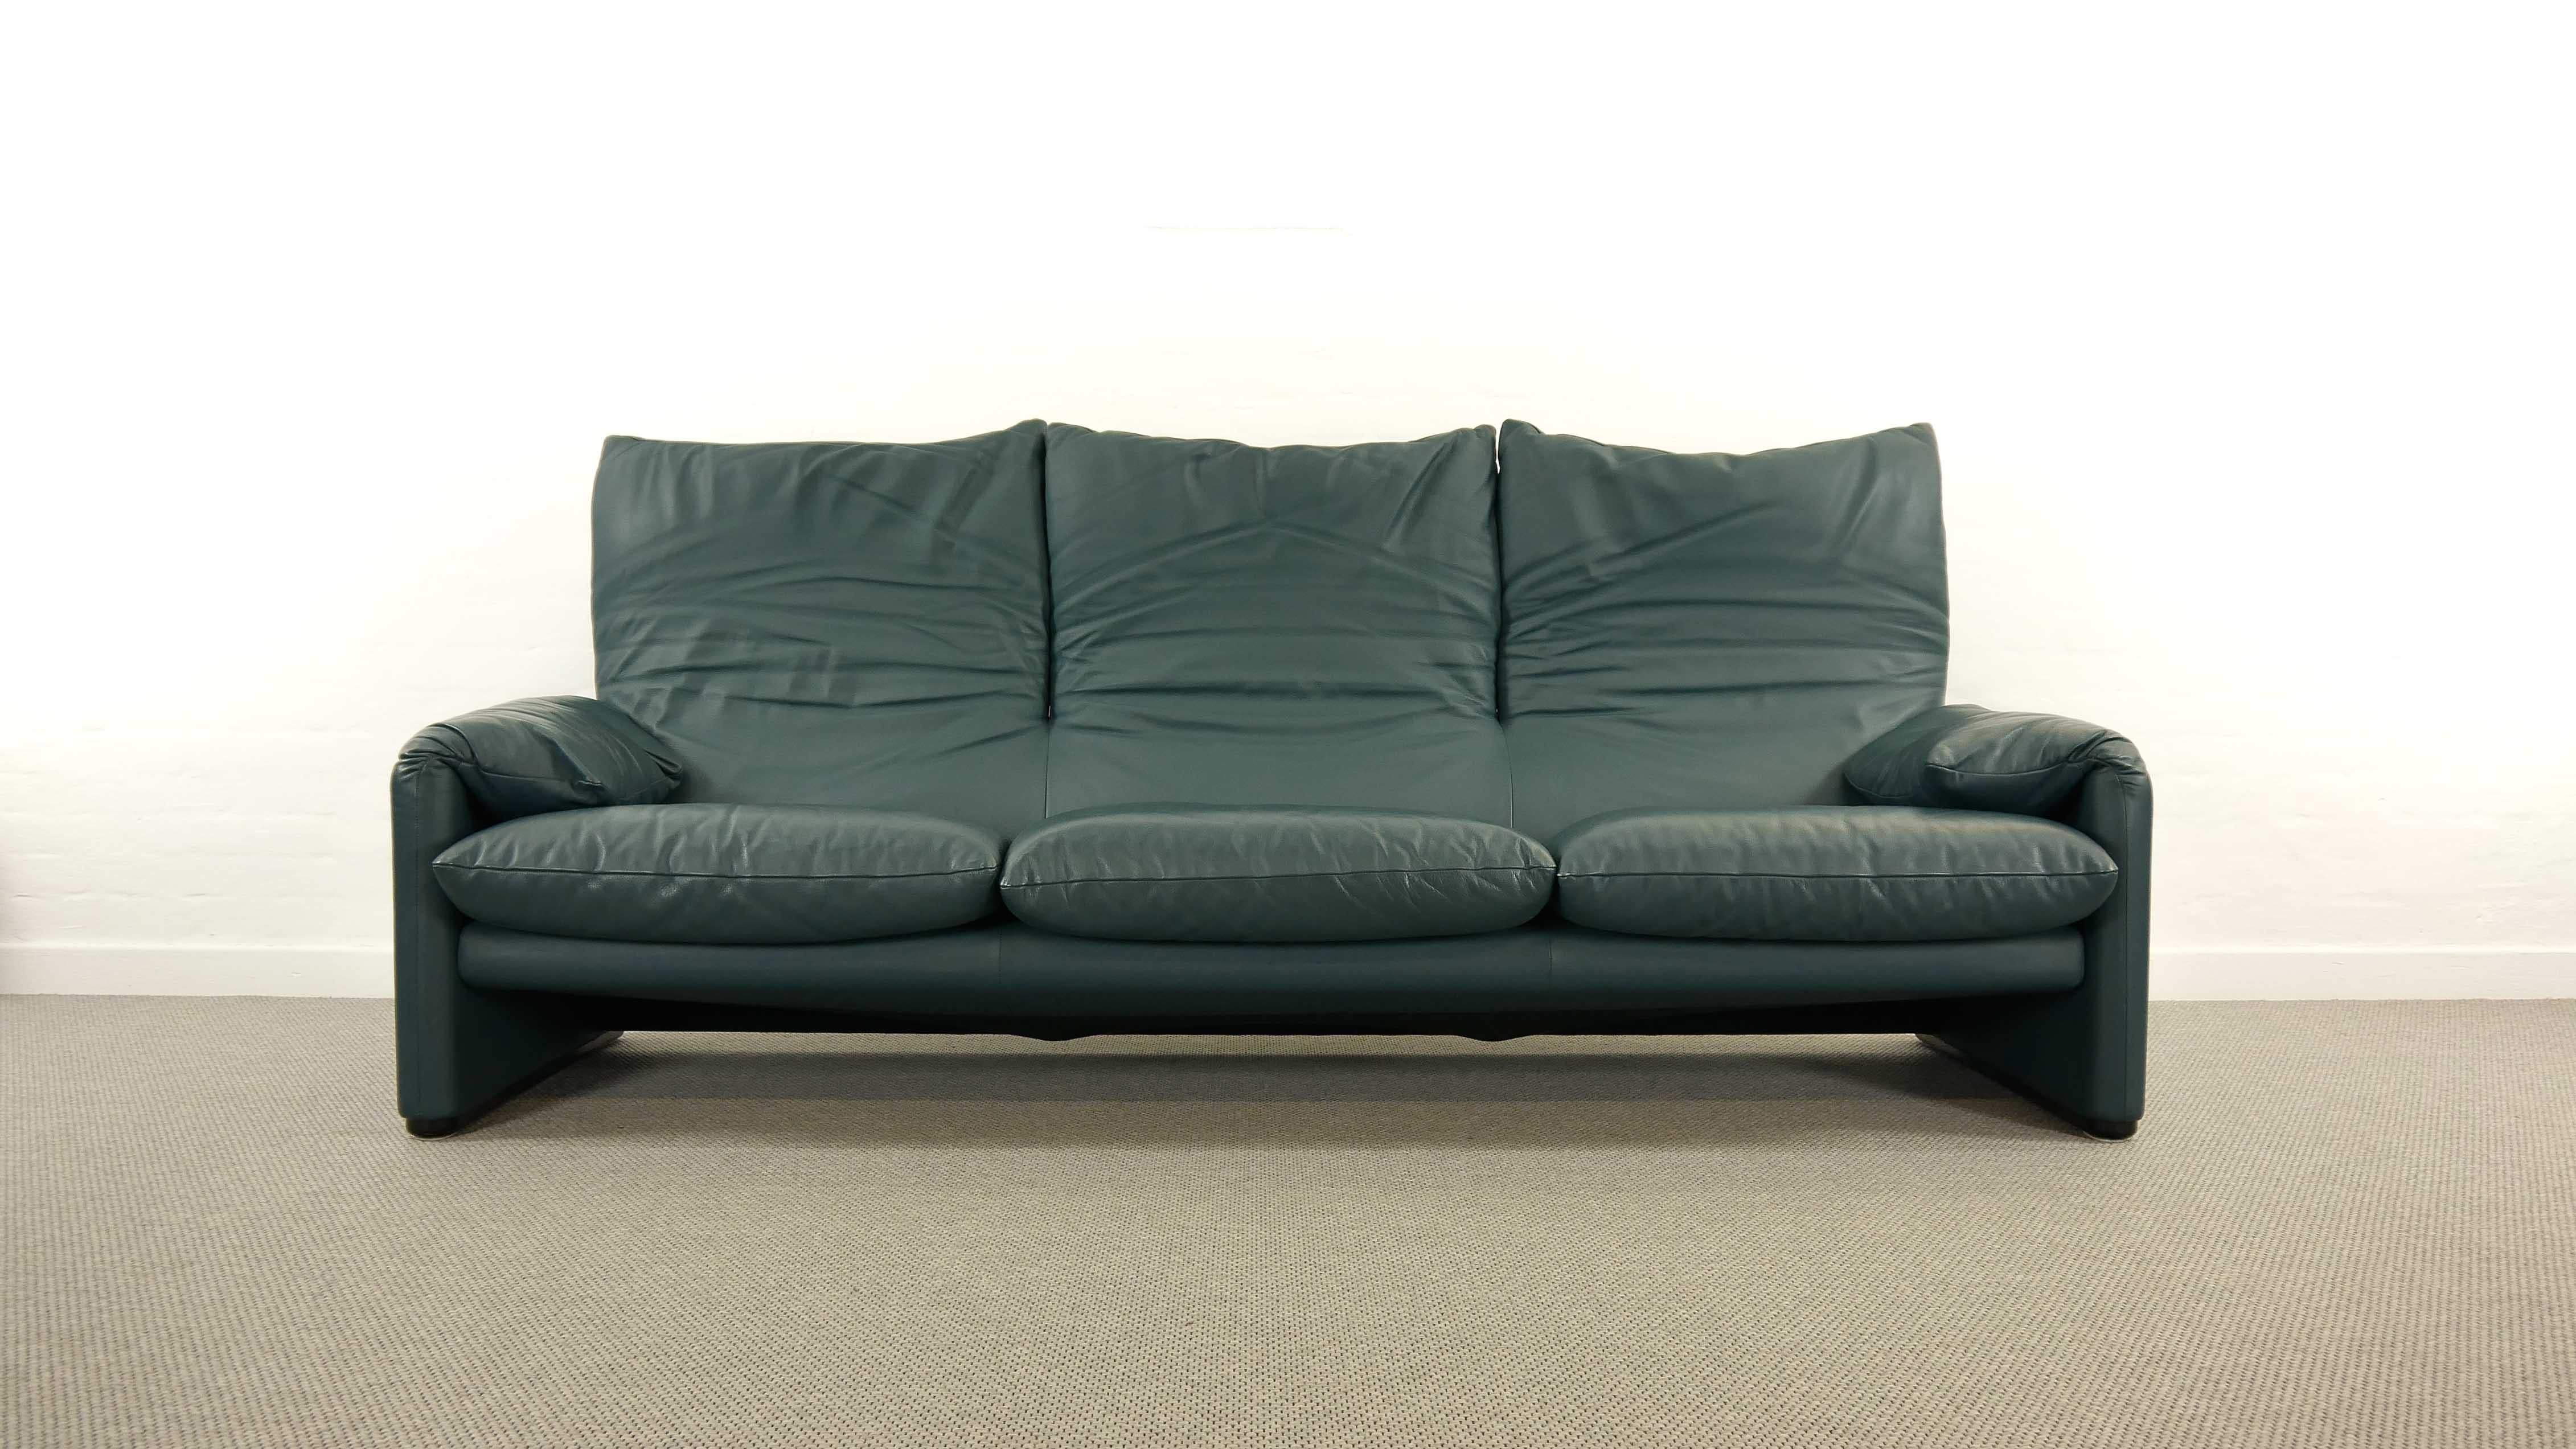 Maralunga 3-seat sofa by Vico Magistretti for Cassina, designed in 1973. Original upholstery in dark green / petrol leather. Color is really hard to capture, depends on the light. This sofa features folding back rests / cushions that can be folded